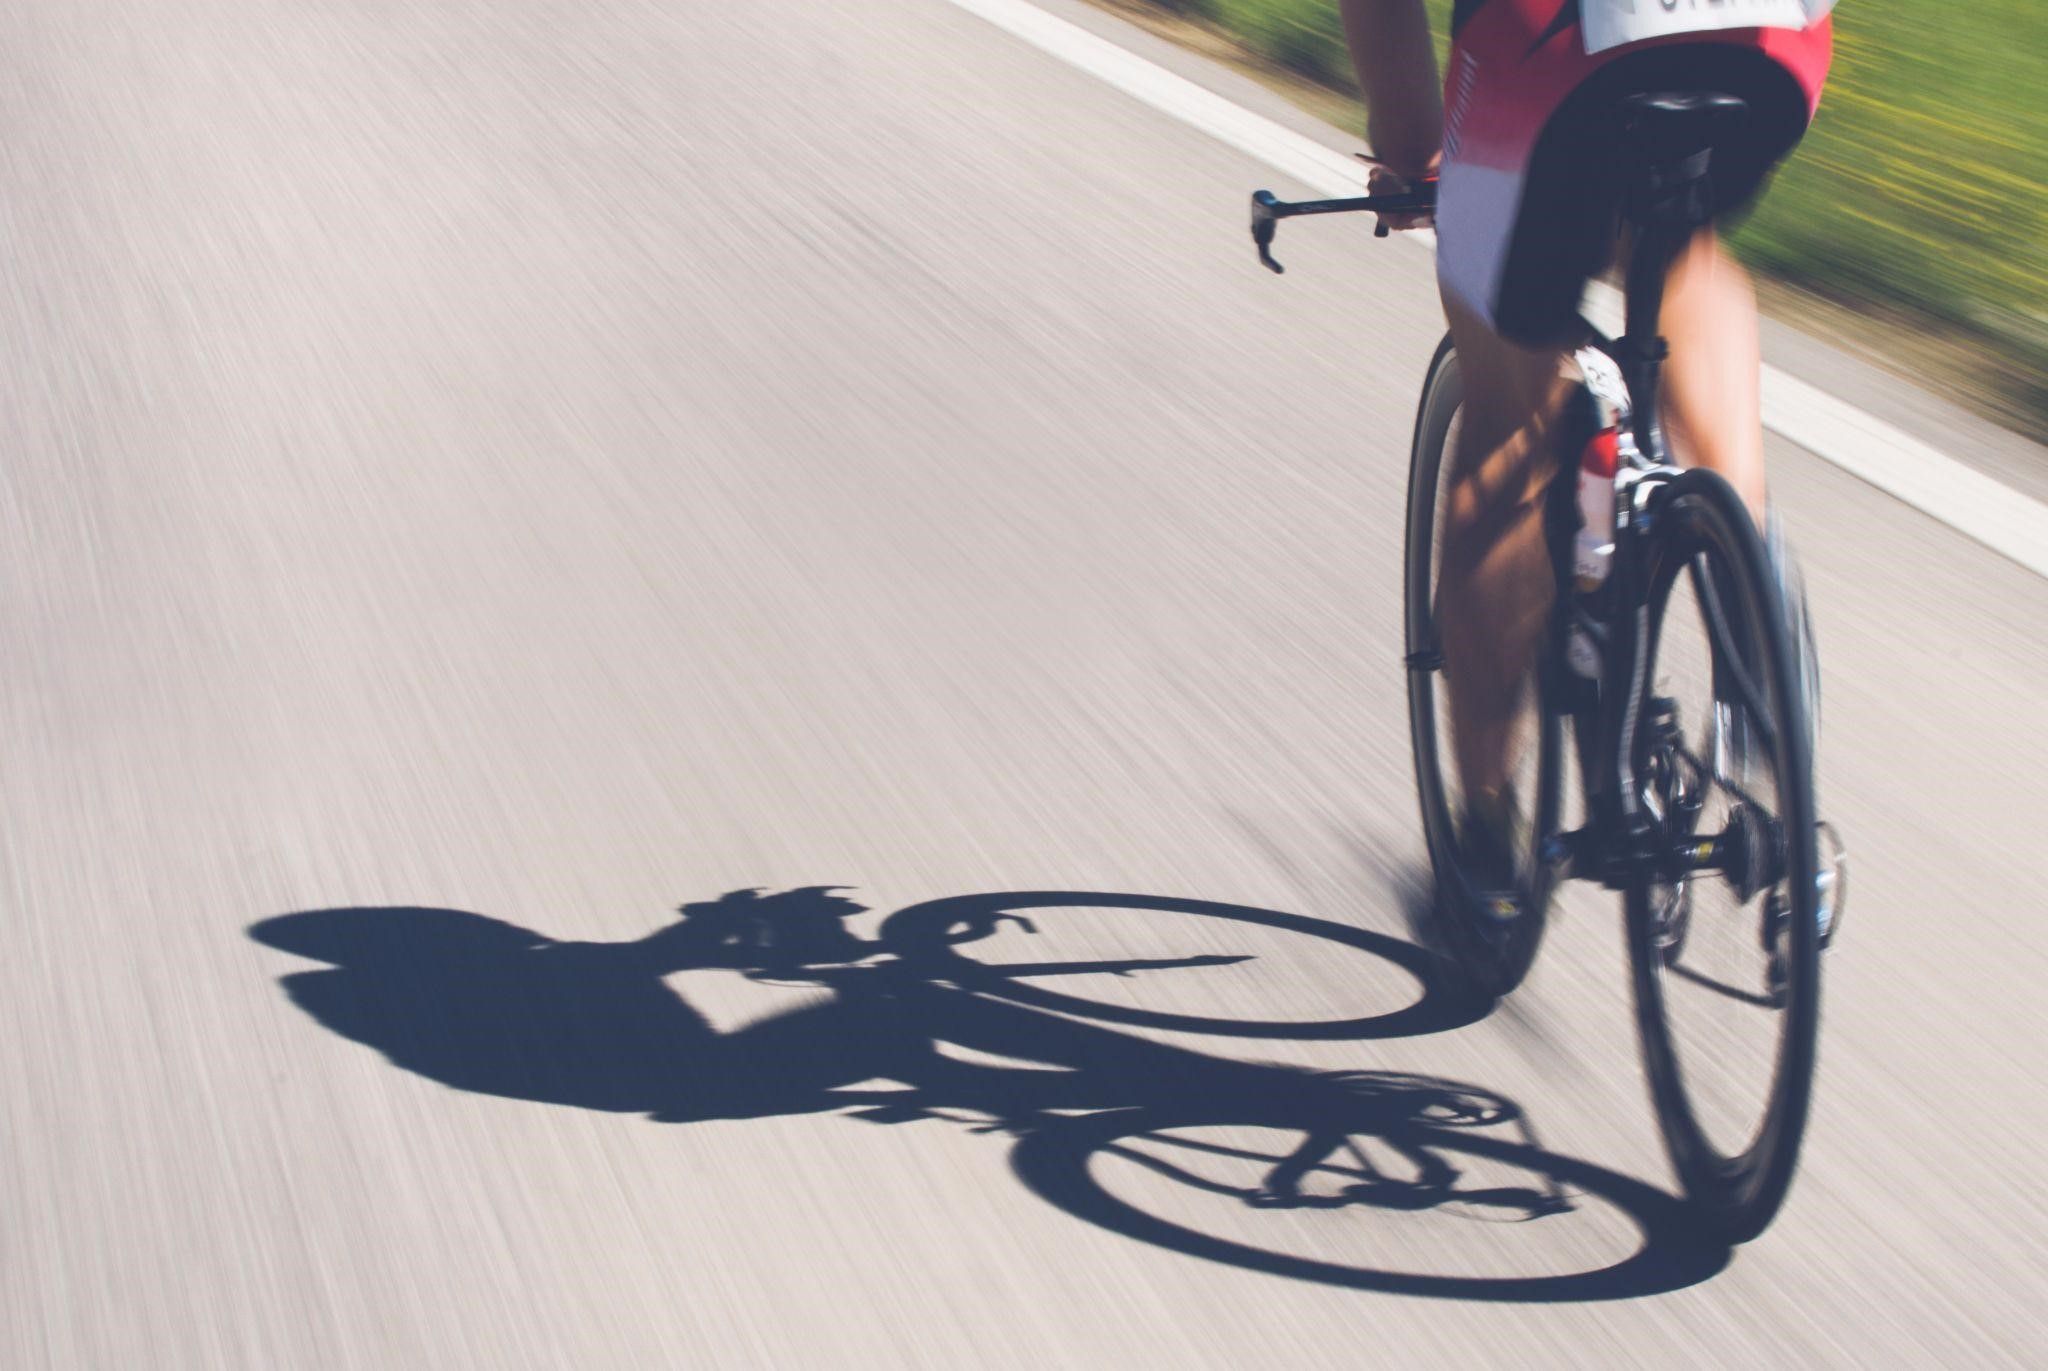 Understanding FTP and the Anaerobic Threshold